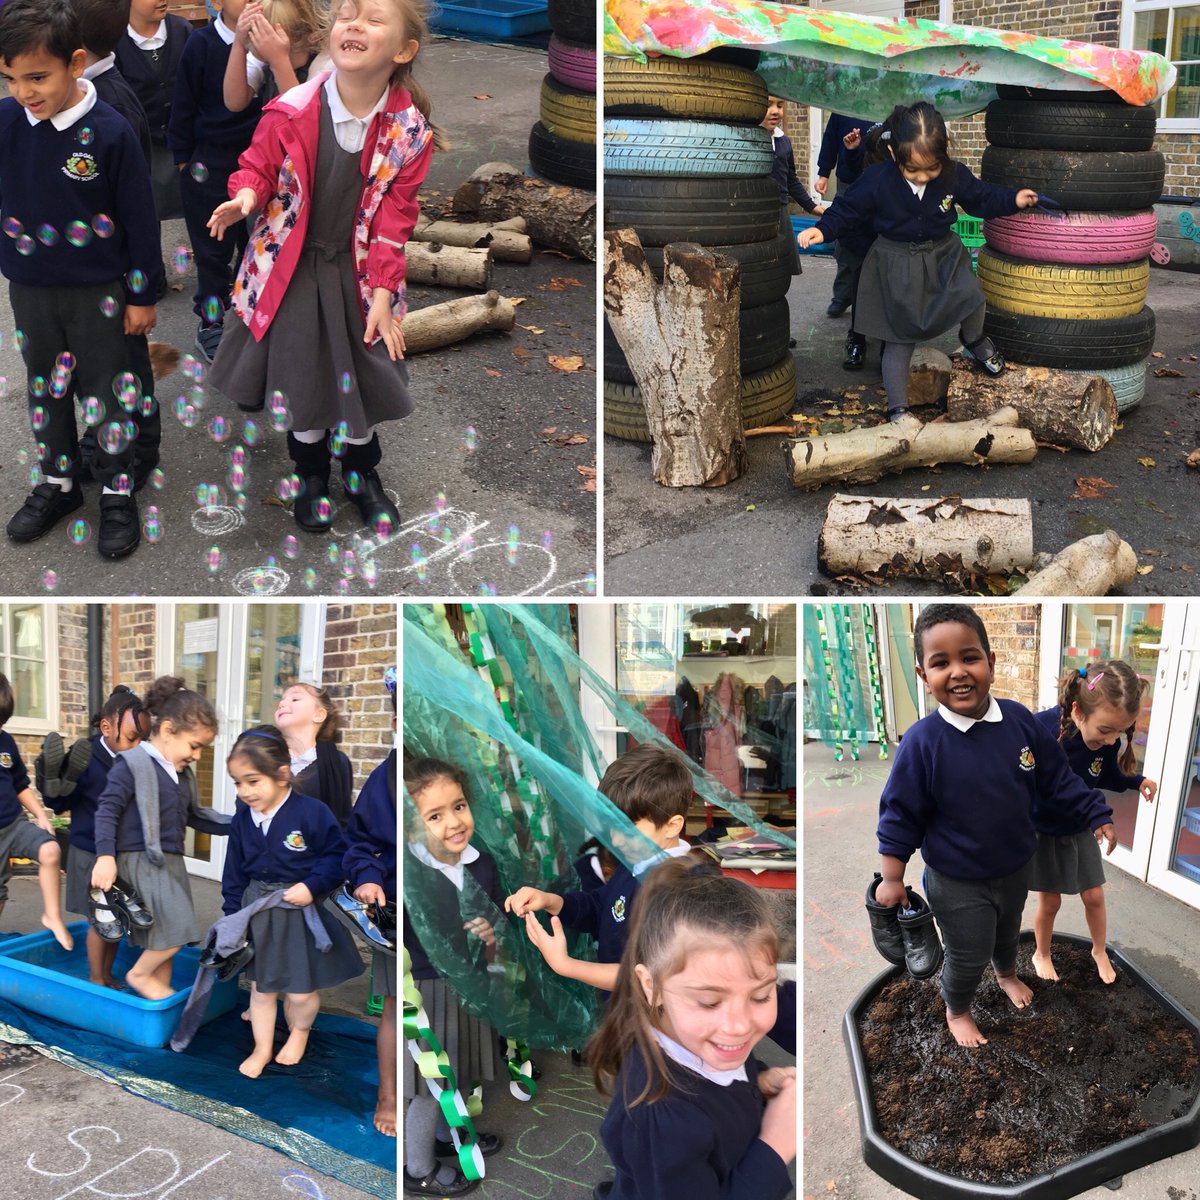 #ReceptionClass braved the weather today to go on a #BearHunt! 🐻 Check out their adventures through the deep, cold river and the thick, oozy mud! #WhatABeautifulDay!

@MichaelRosenYes #WereGoingOnABearHunt #WereNotScared #CLPE #PowerOfReading #EYFS #Reception #School #Education